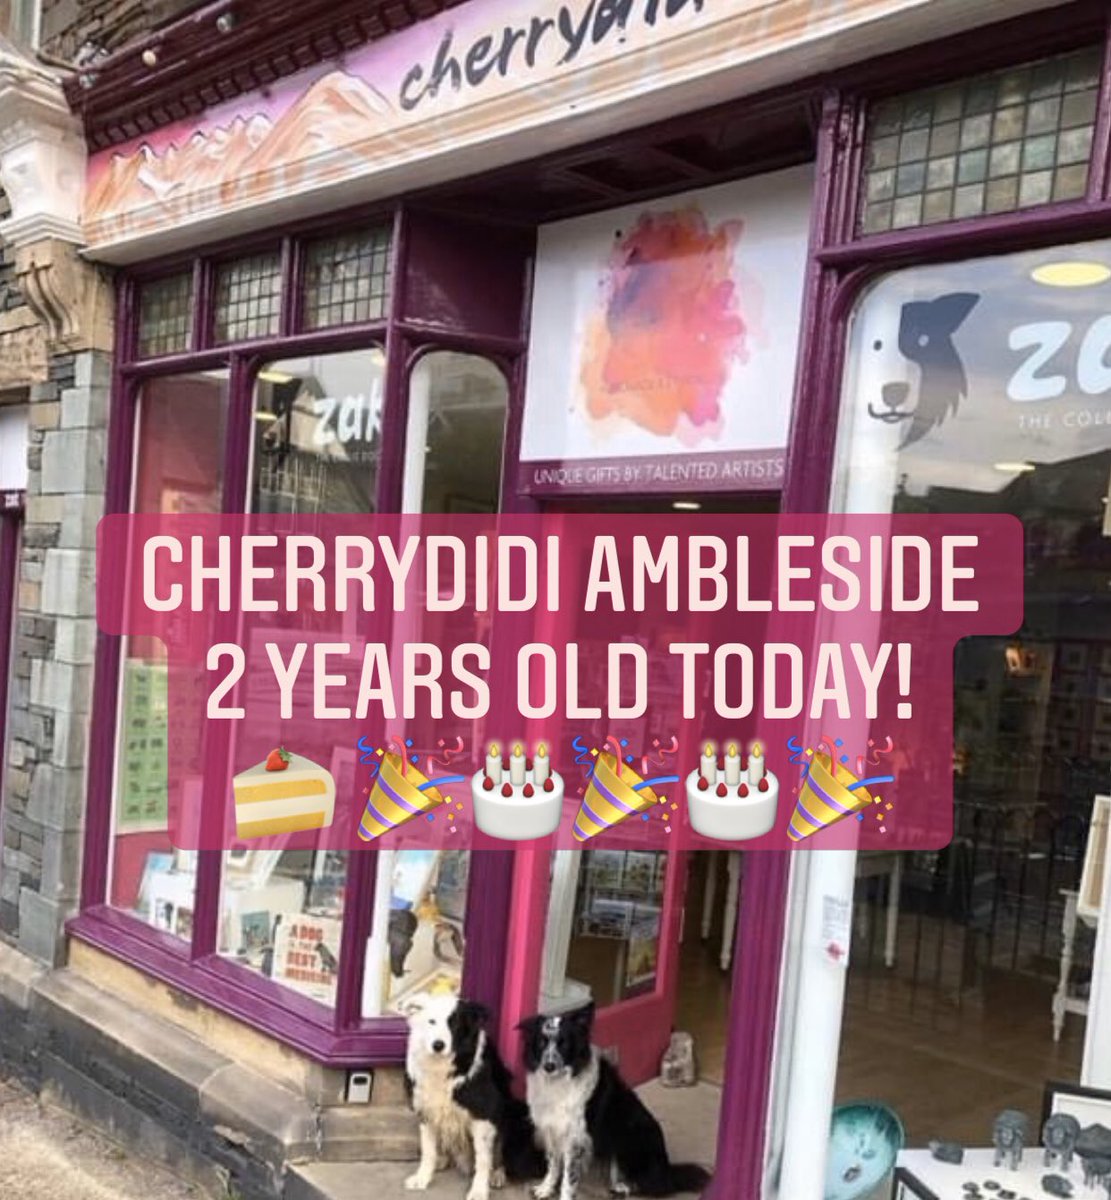 With all that’s going on we almost missed it.... CHERRYDIDI AMBLESIDE is 2 TODAY!  🎉🎂🎉🎂🎉 It’s been an interesting journey so far & what a wonderful addition to #cherrydidikeswick
Ade & I, & our staff thank every one of you that has been involved in making it a success. 🙏♥️